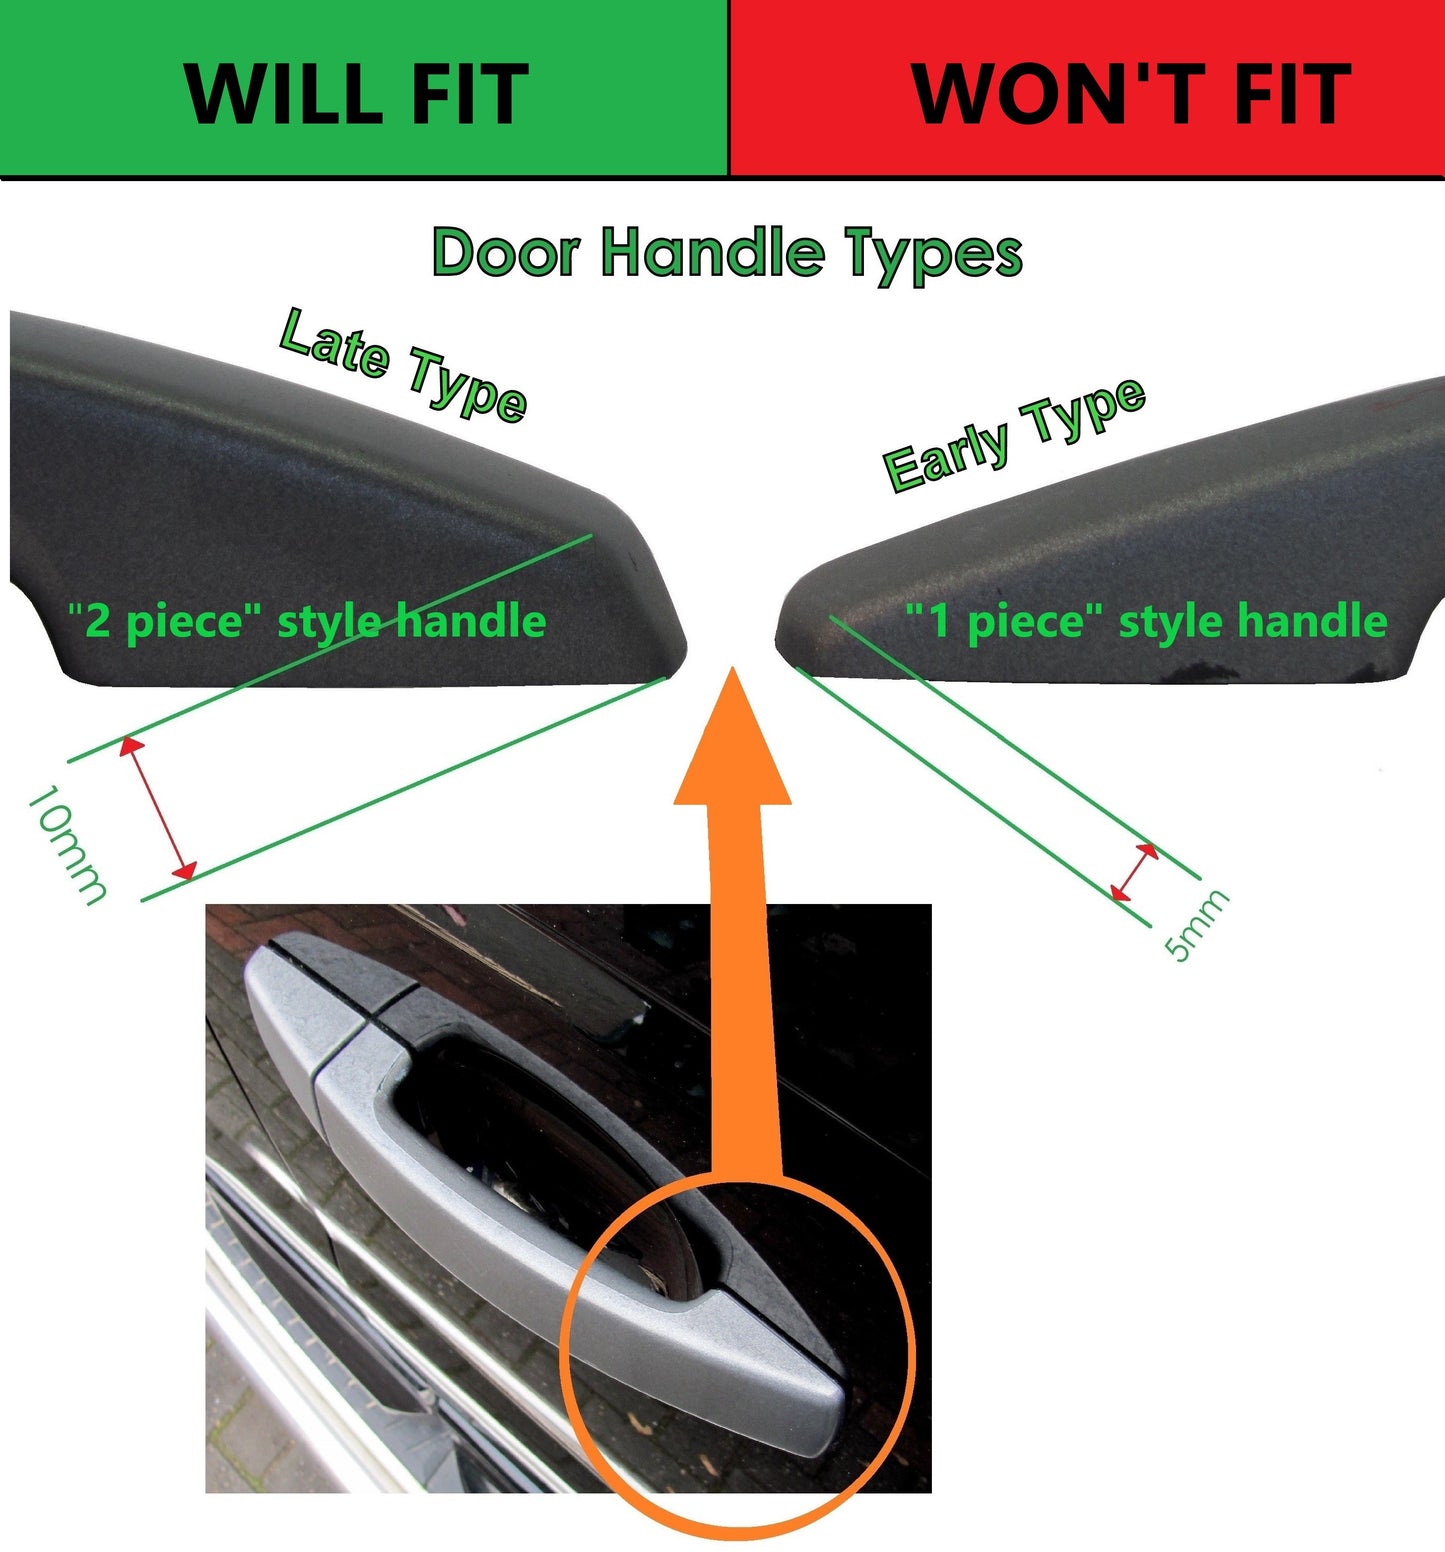 Door Handle "Skins" for Land Rover Freelander 2 fitted with 2 pc Handle - Stornoway Grey